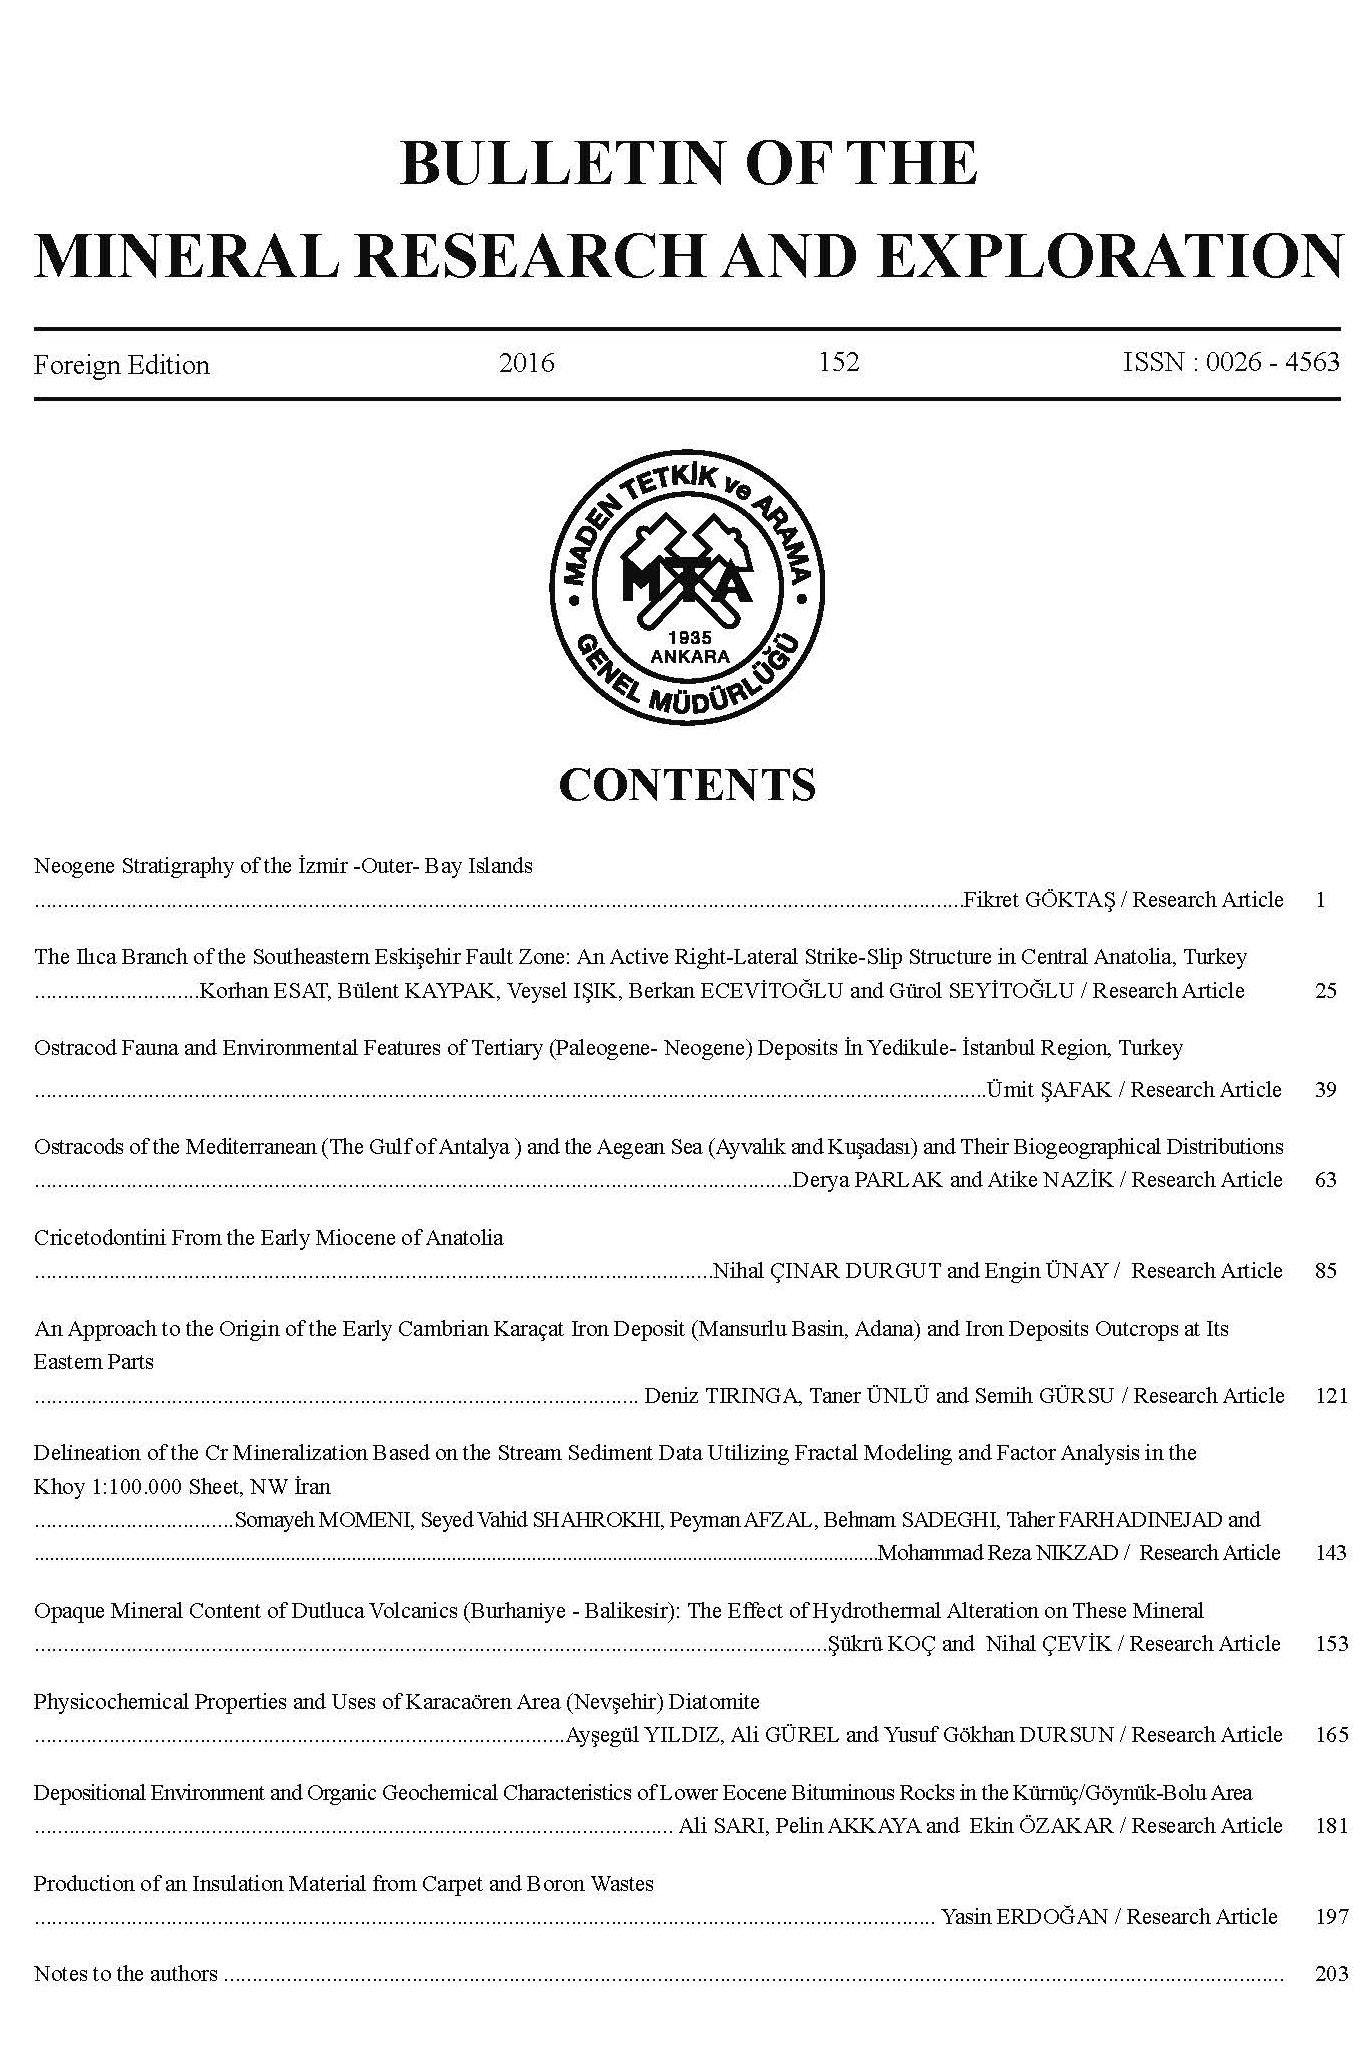 Bulletin  of the Mineral Research and Exploration